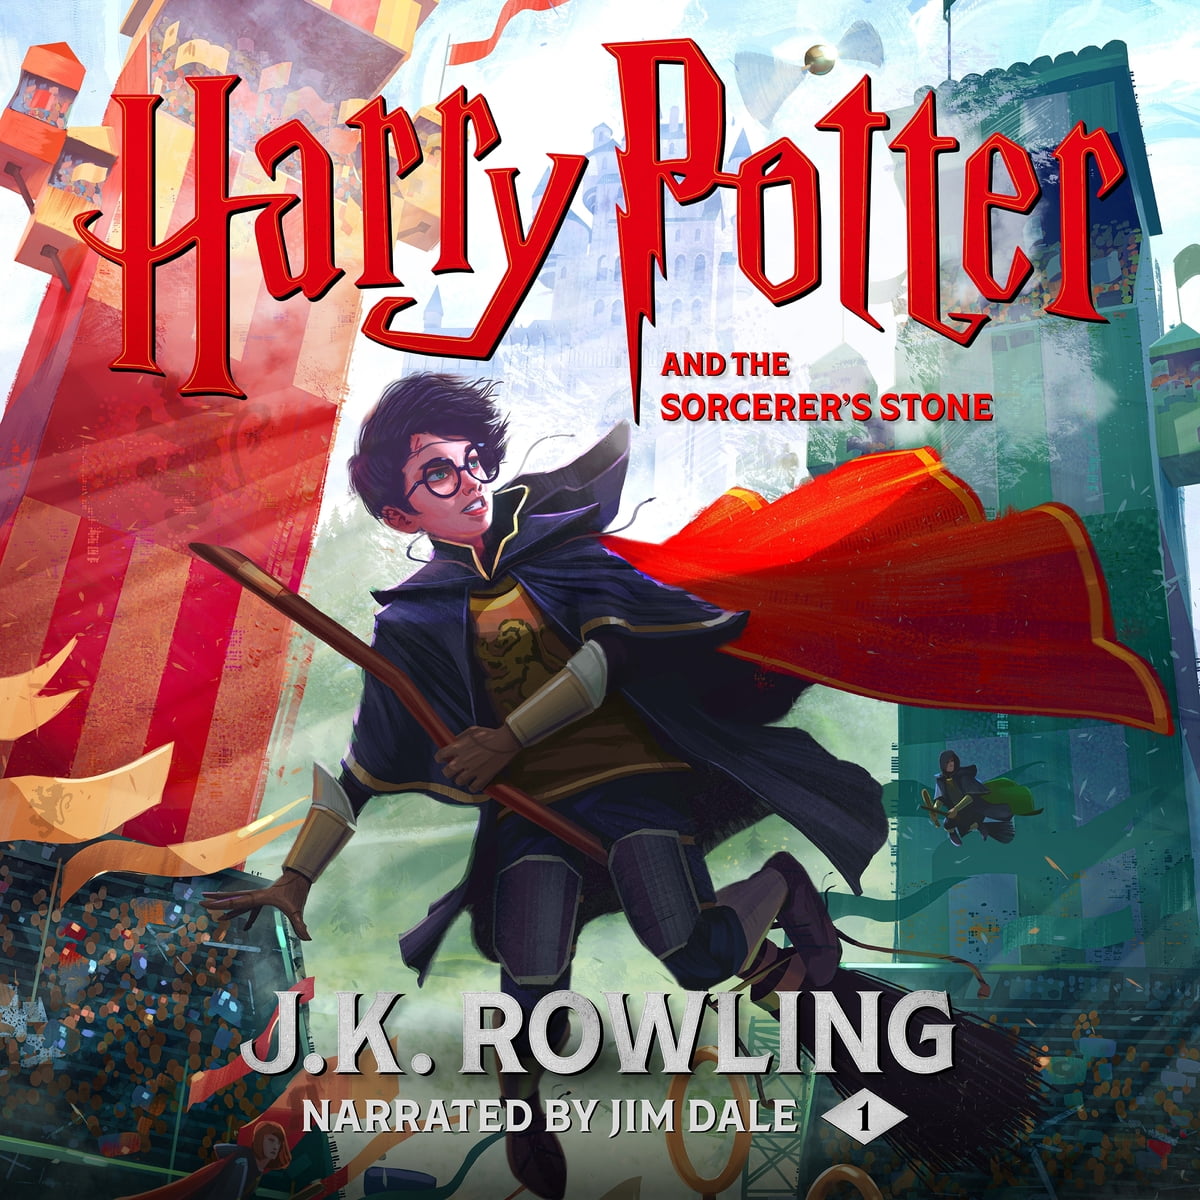 Can I listen to Harry Potter audiobooks on my HP tablet? 2